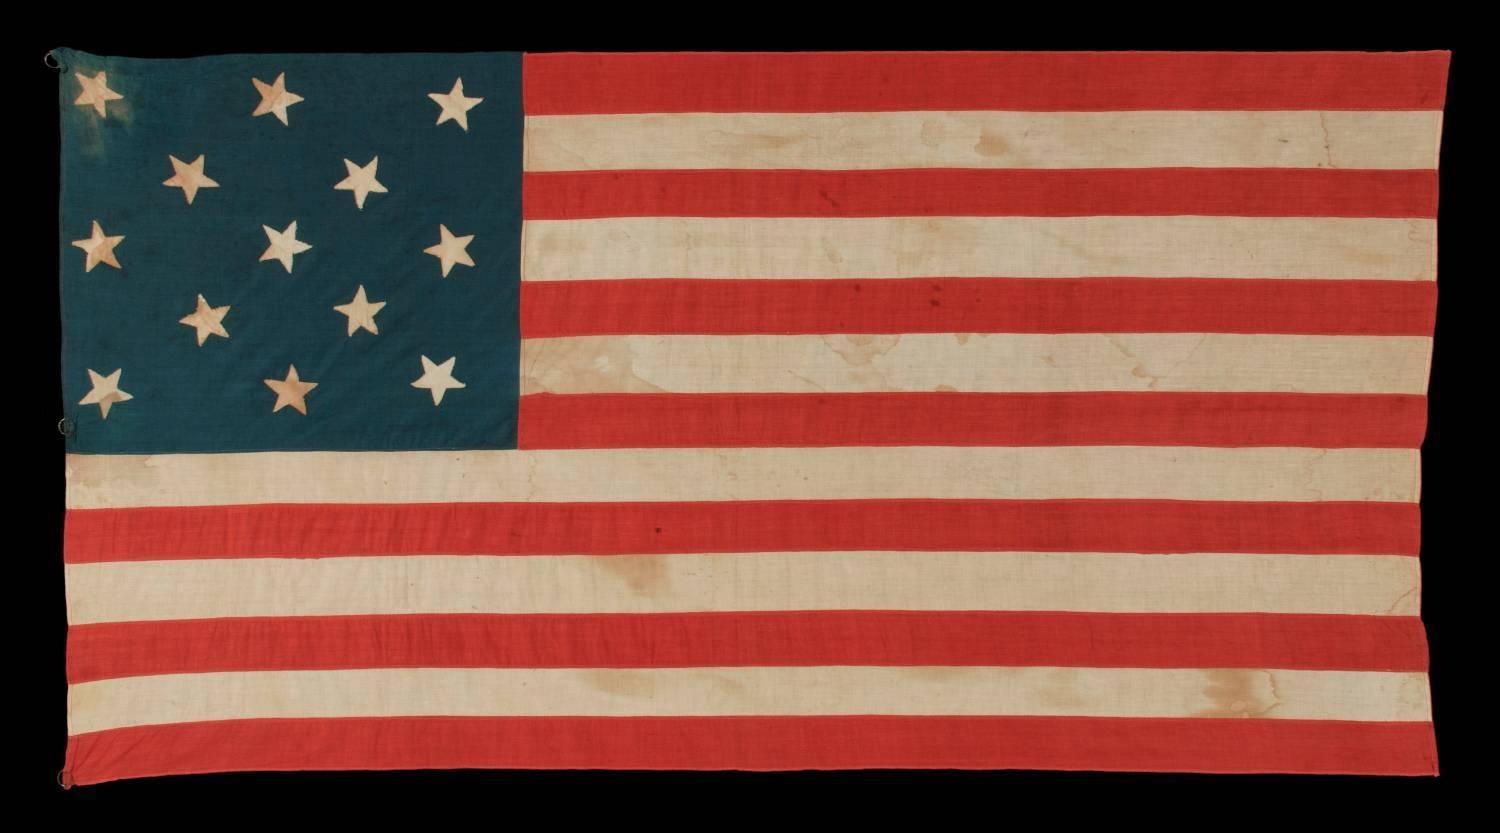 13 hand-sewn stars arranged in a 3-2-3-2-3 pattern, with varying vertical orientation, on a homemade antique American flag dating to the era of the 1876 centennial of American independence:

13 star American national flag, made around the time of